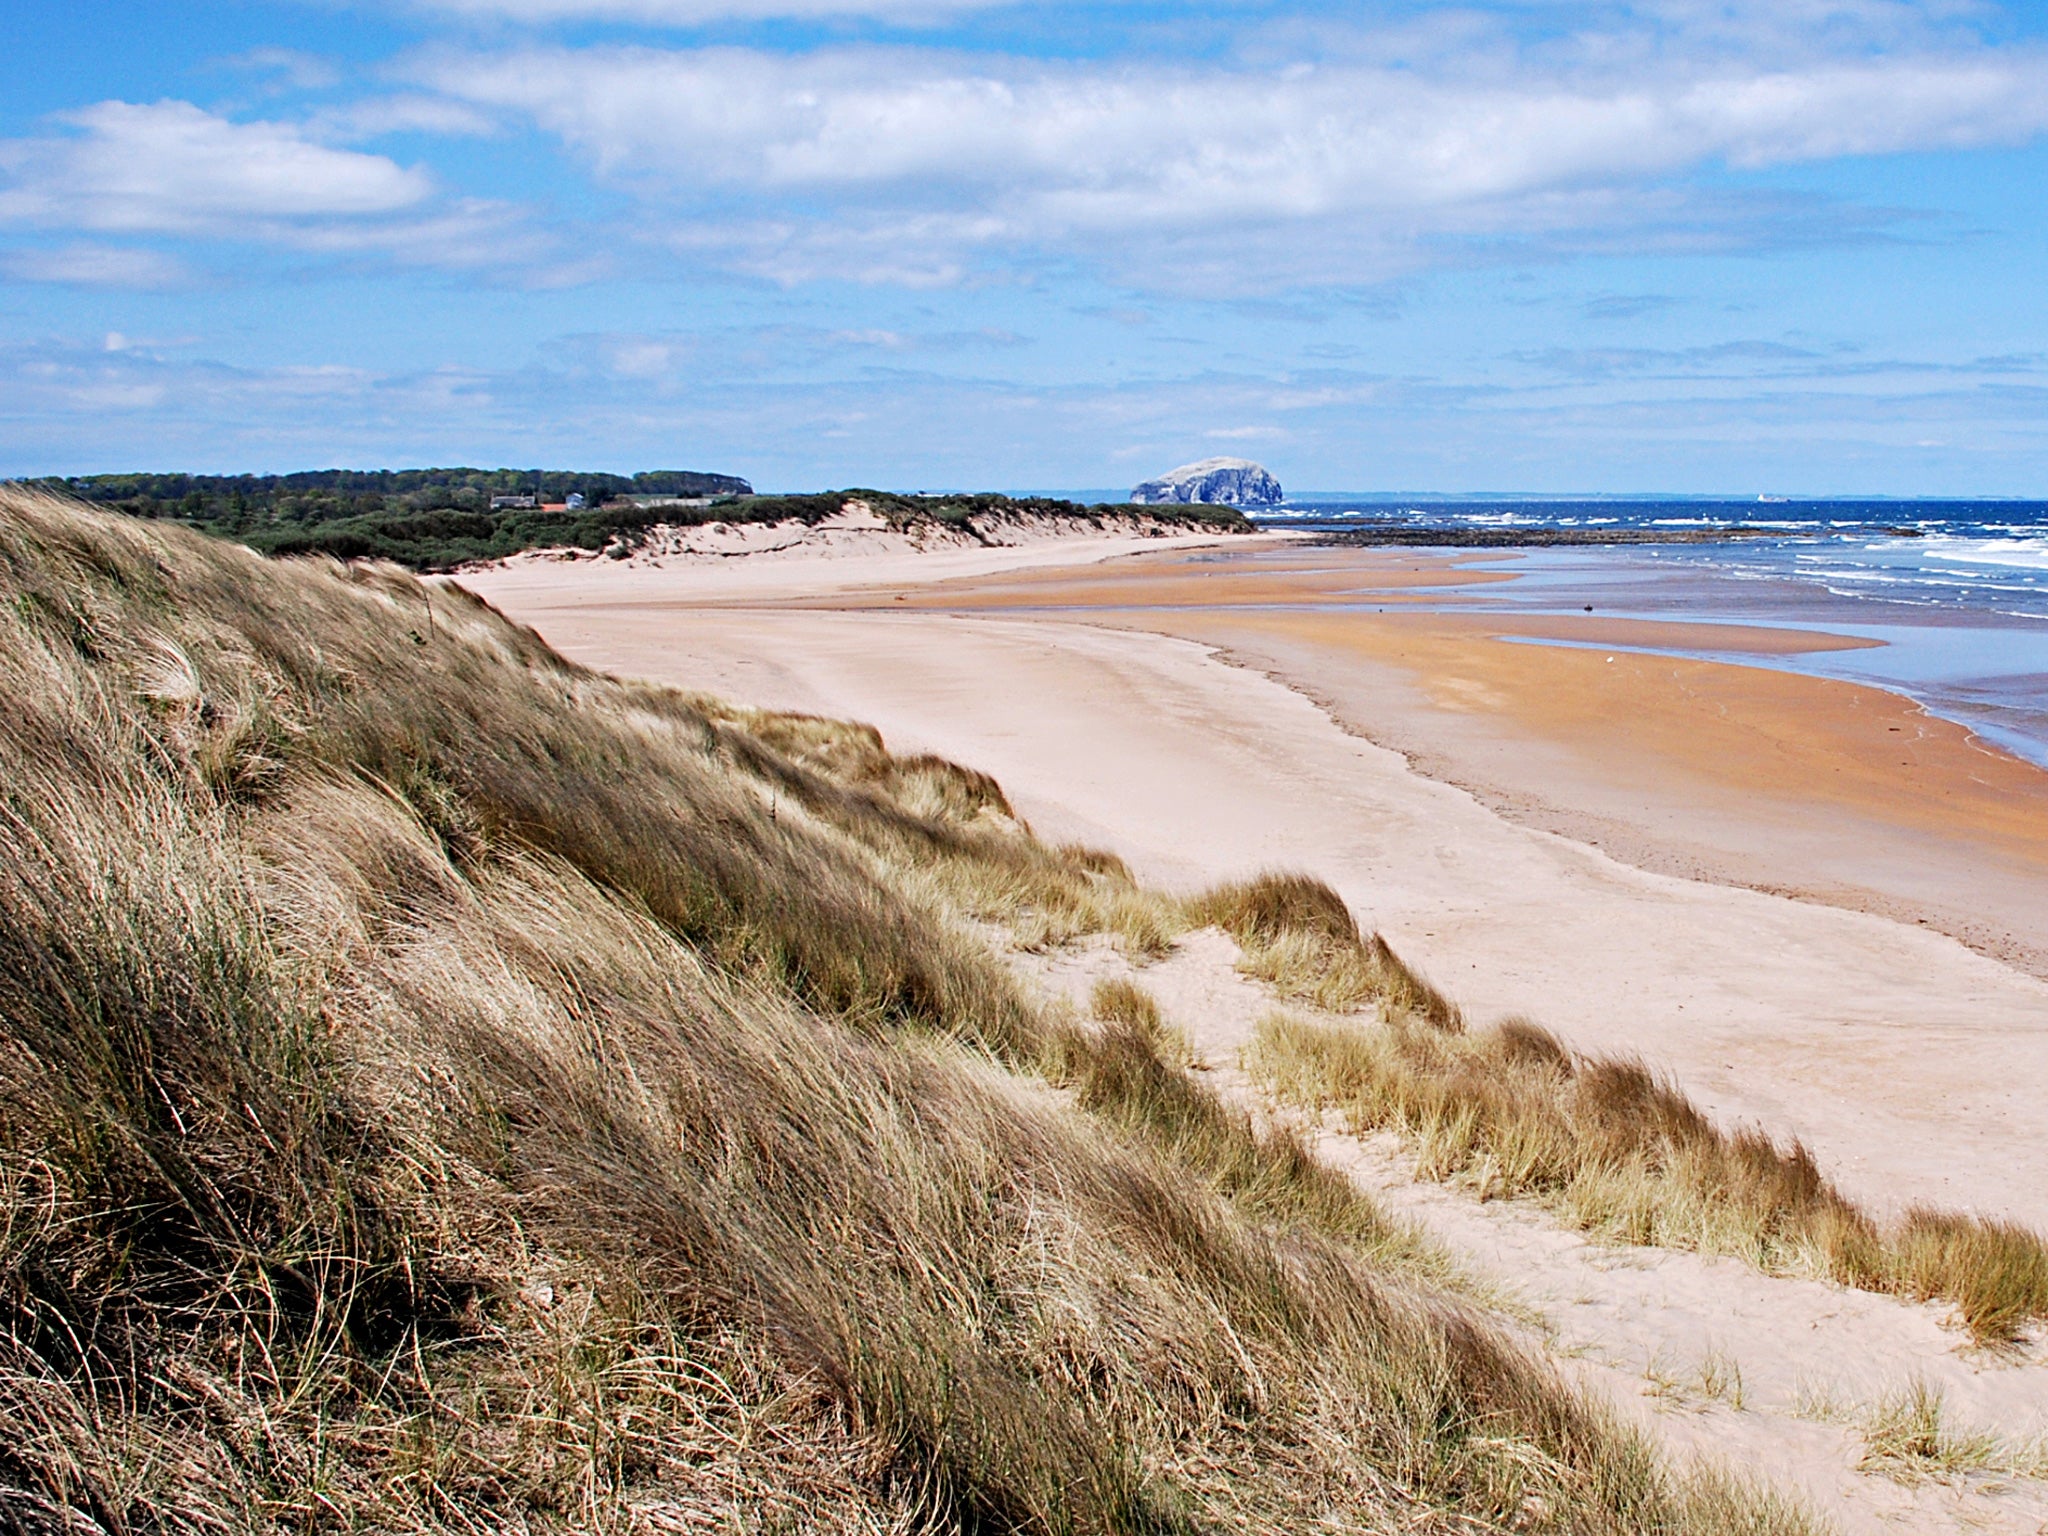 Dune roaming: the East Lothian shore near Edinburgh and location of Harvest Moon Holiday's luxury tents